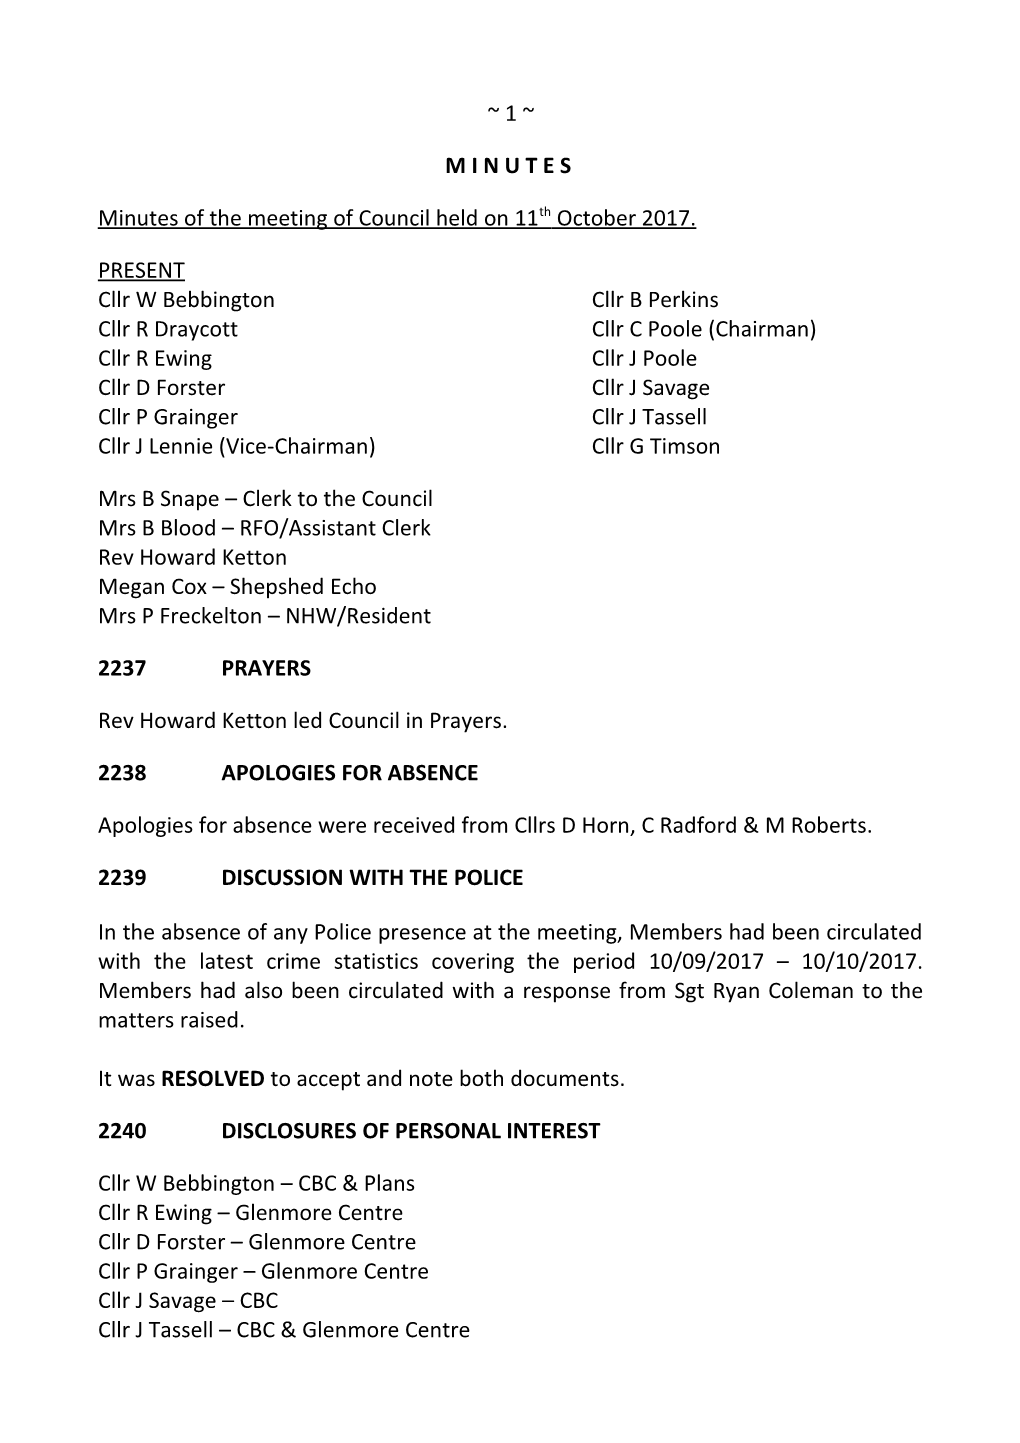 Minutes of the Meeting of Council Held on 11Th October 2017